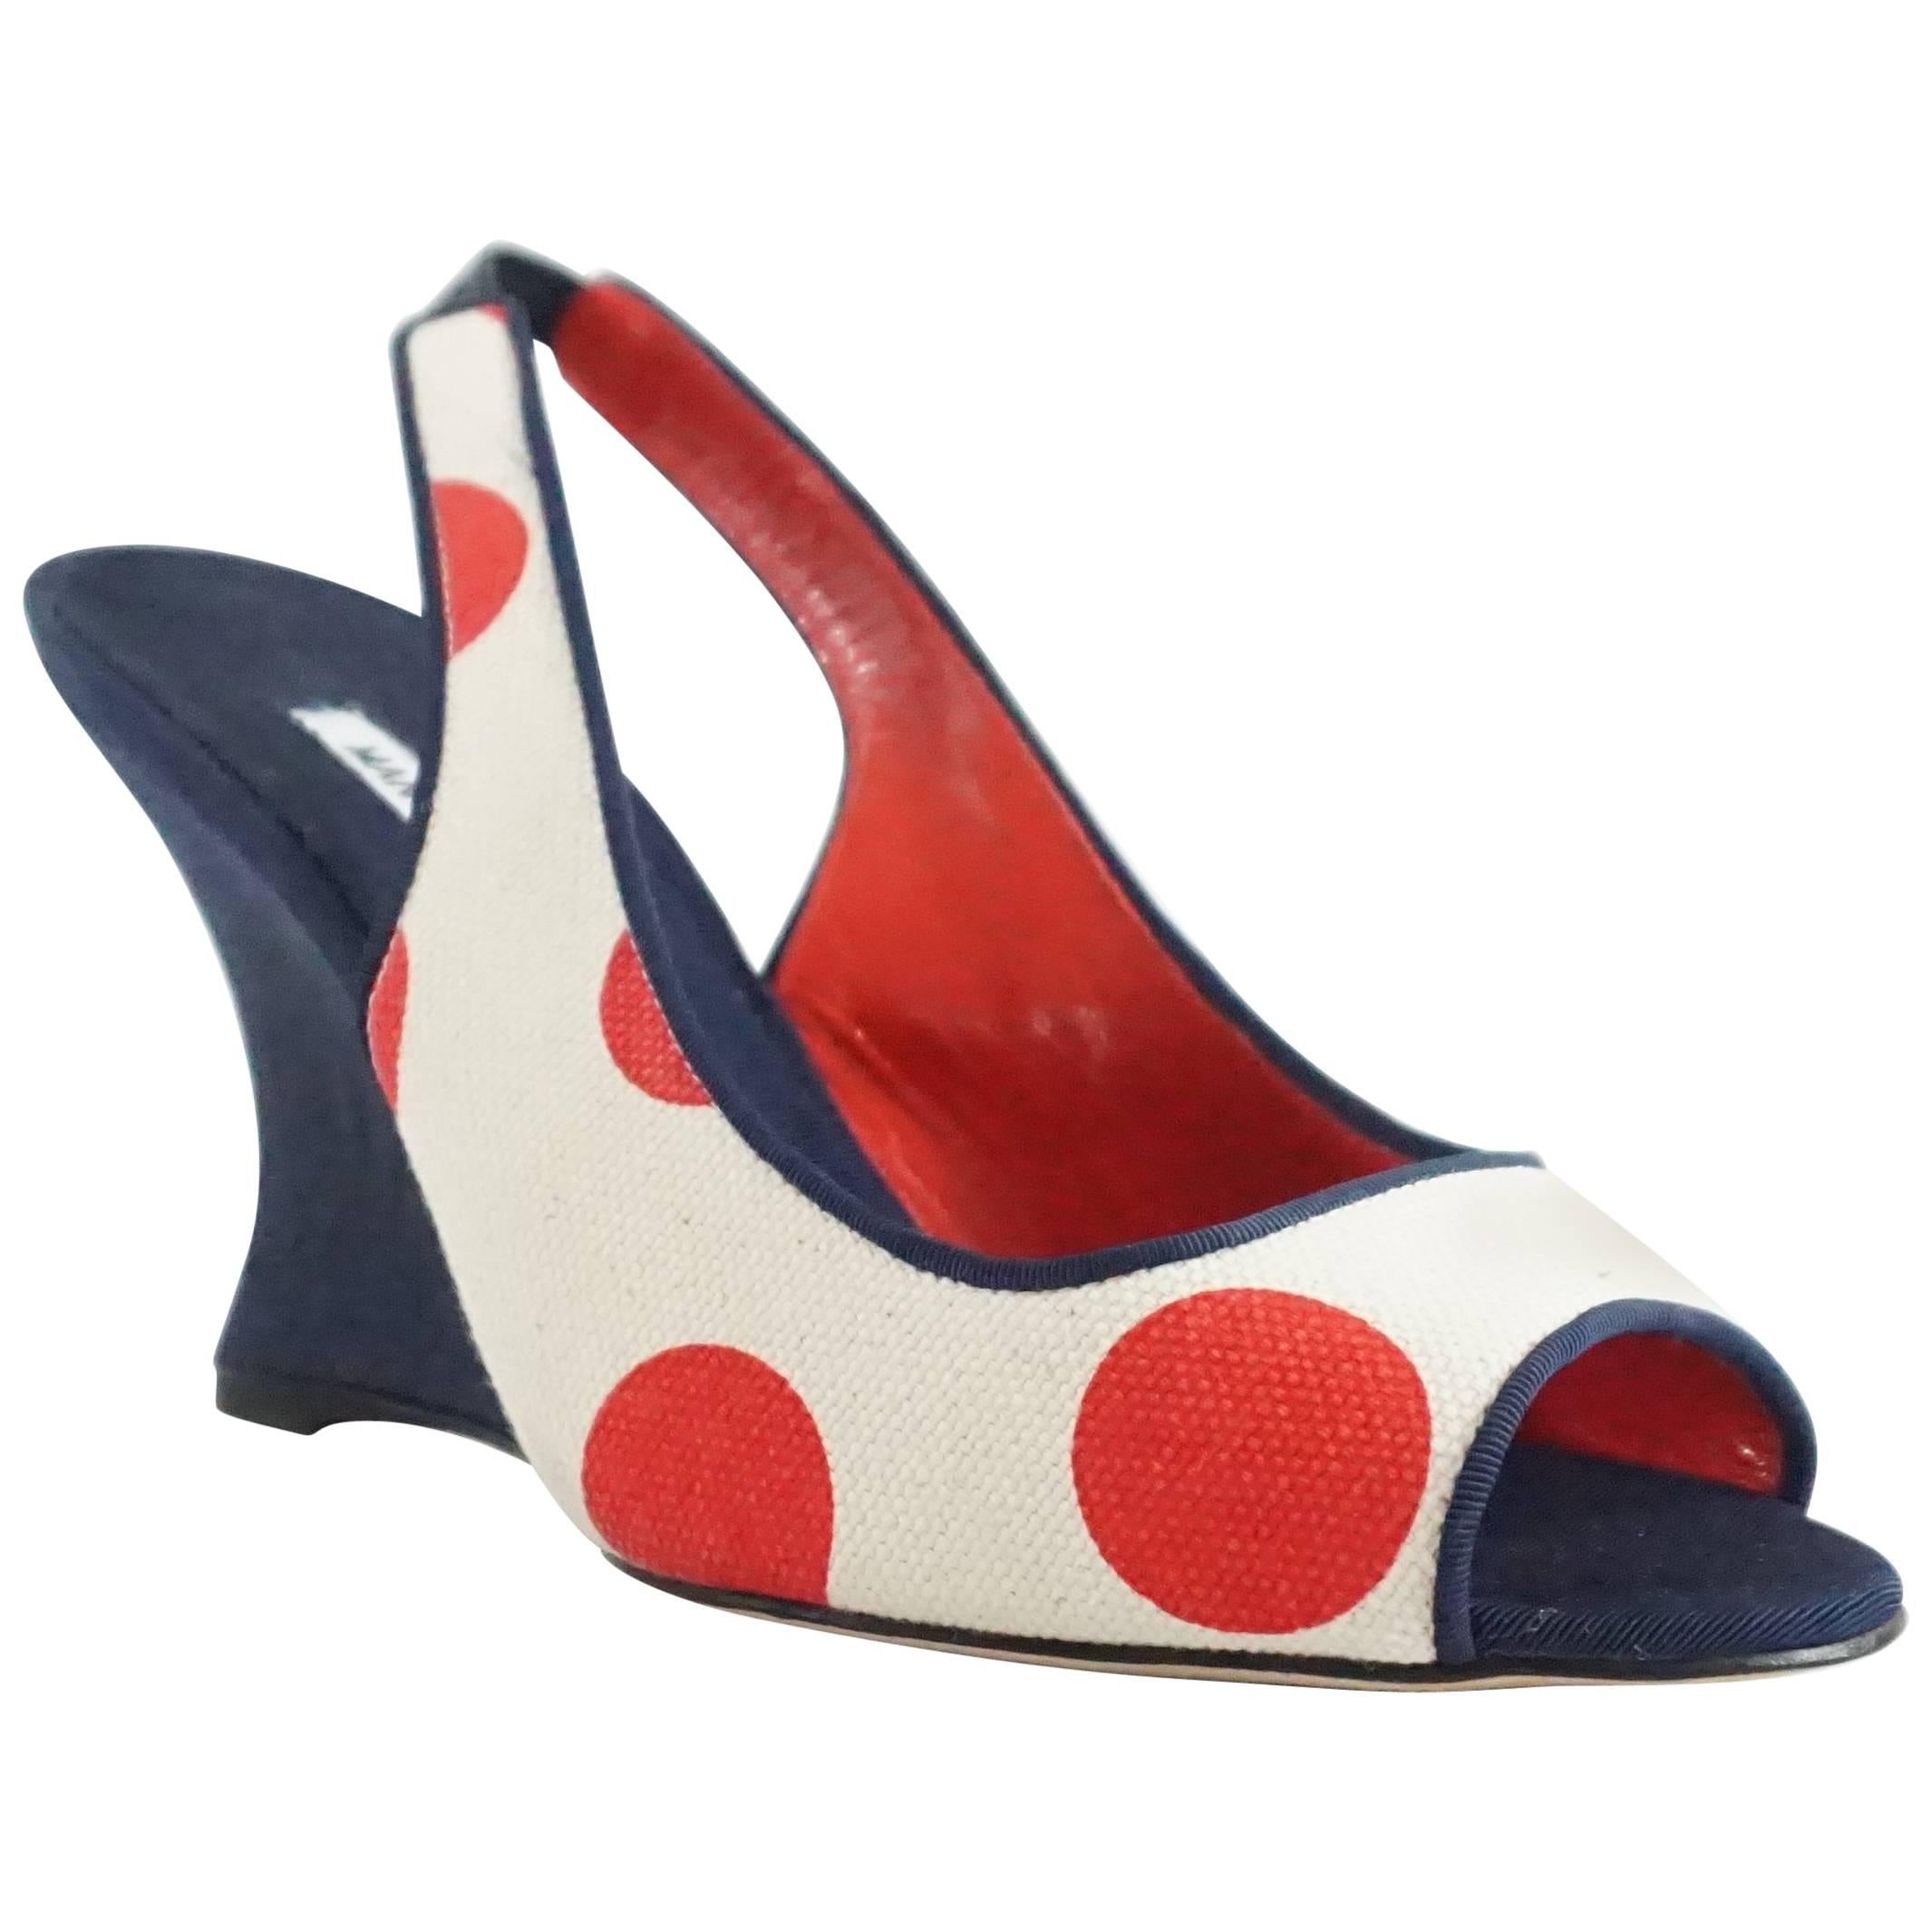 Manolo Blahnik Cream and Red Polka Dot Navy Wedges, Size 37.5